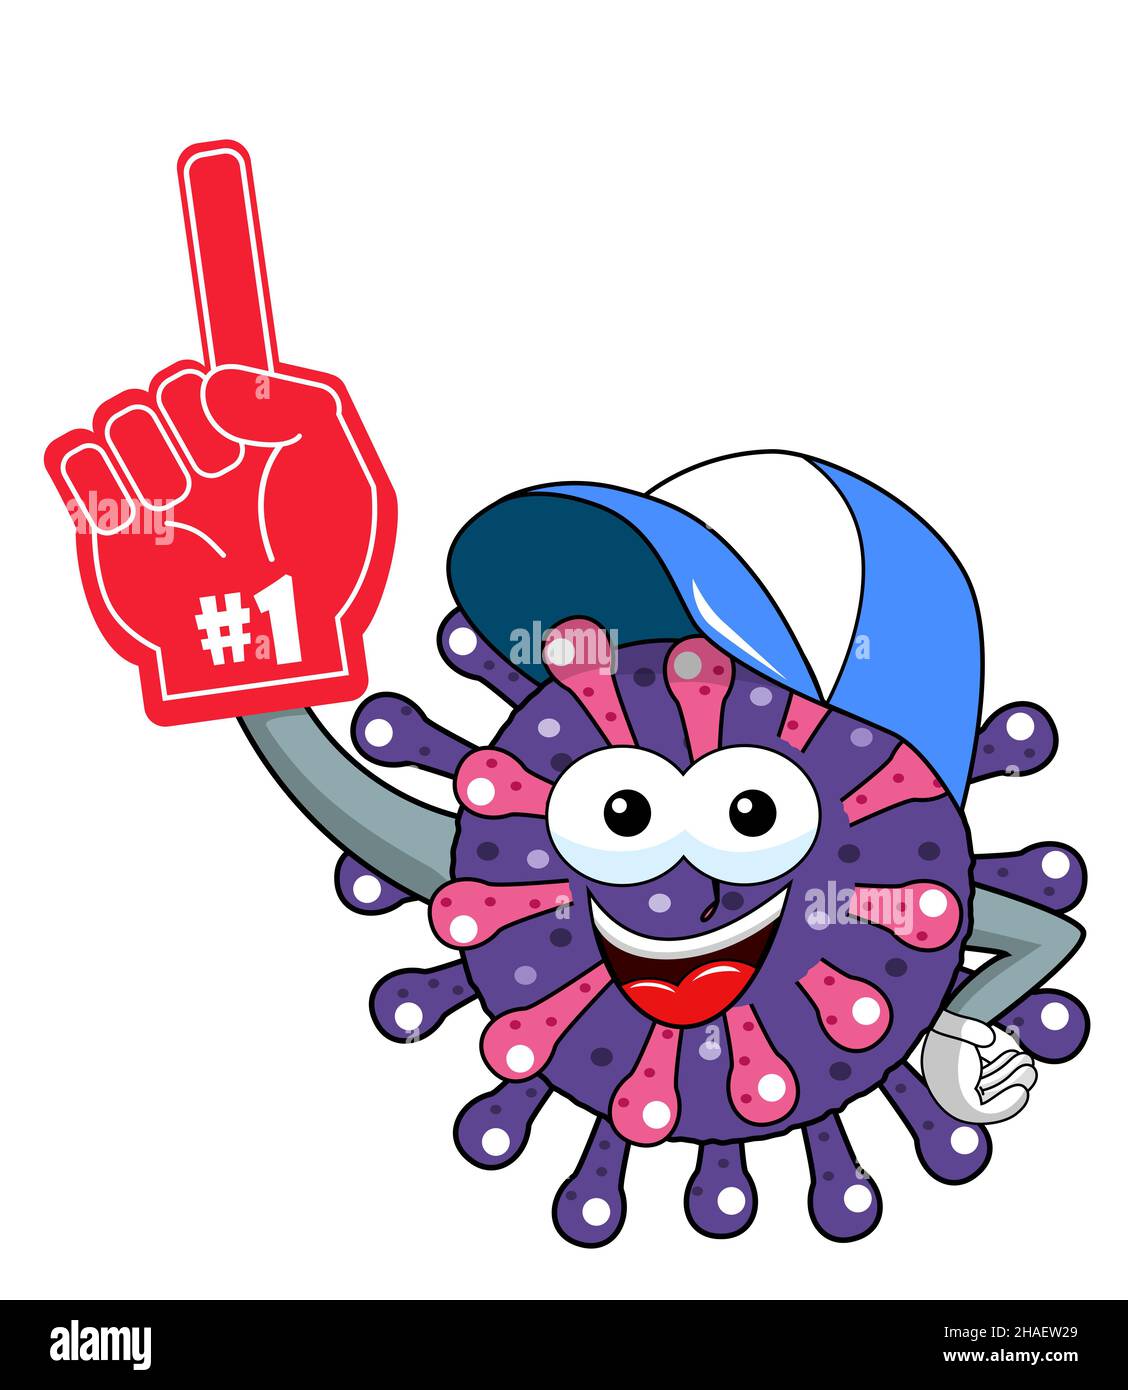 Cartoon mascot character virus or bacterium number one glove sport supporter isolated vector illustration. Stock Photo